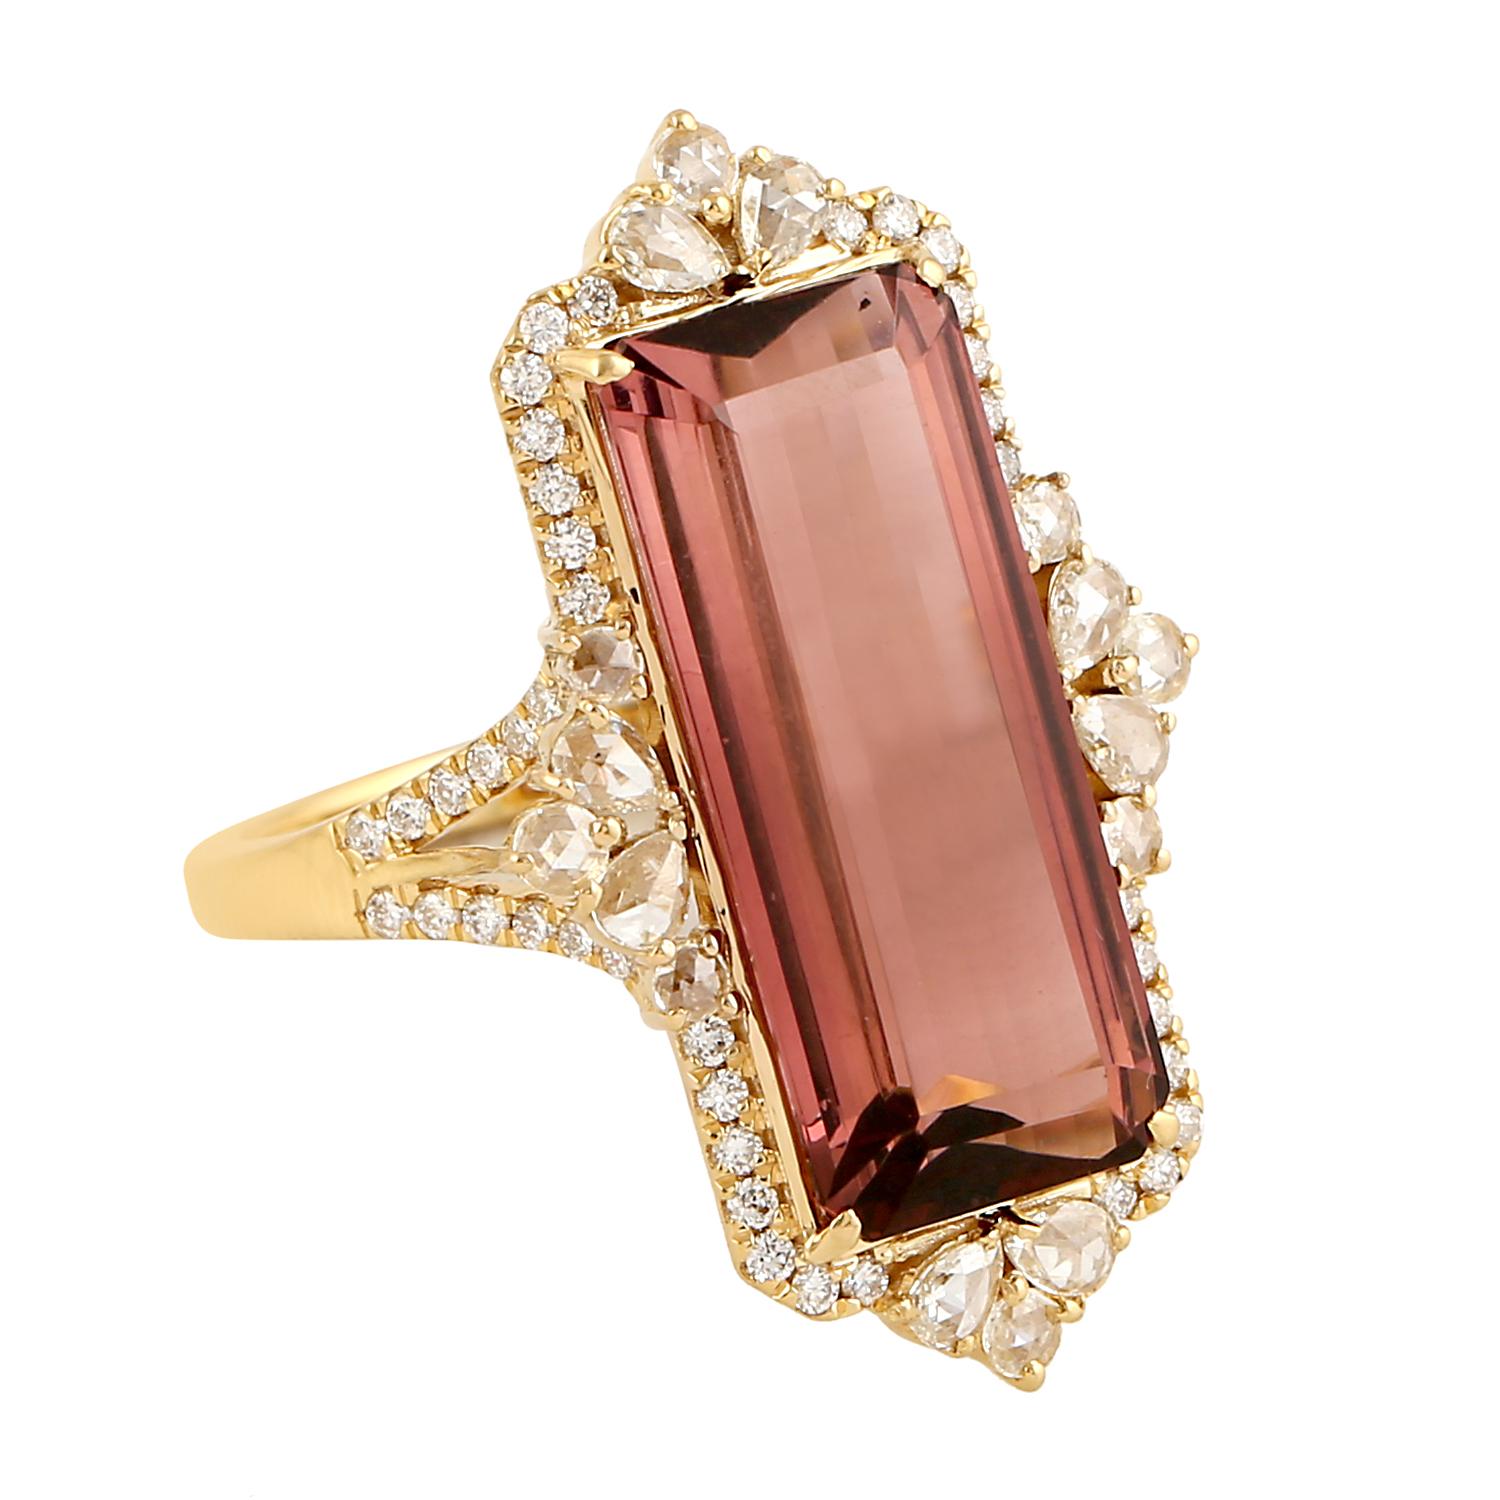 Women's Pink Tourmaline Cocktail Ring Wth Diamonds Made in 18k Yellow Gold For Sale